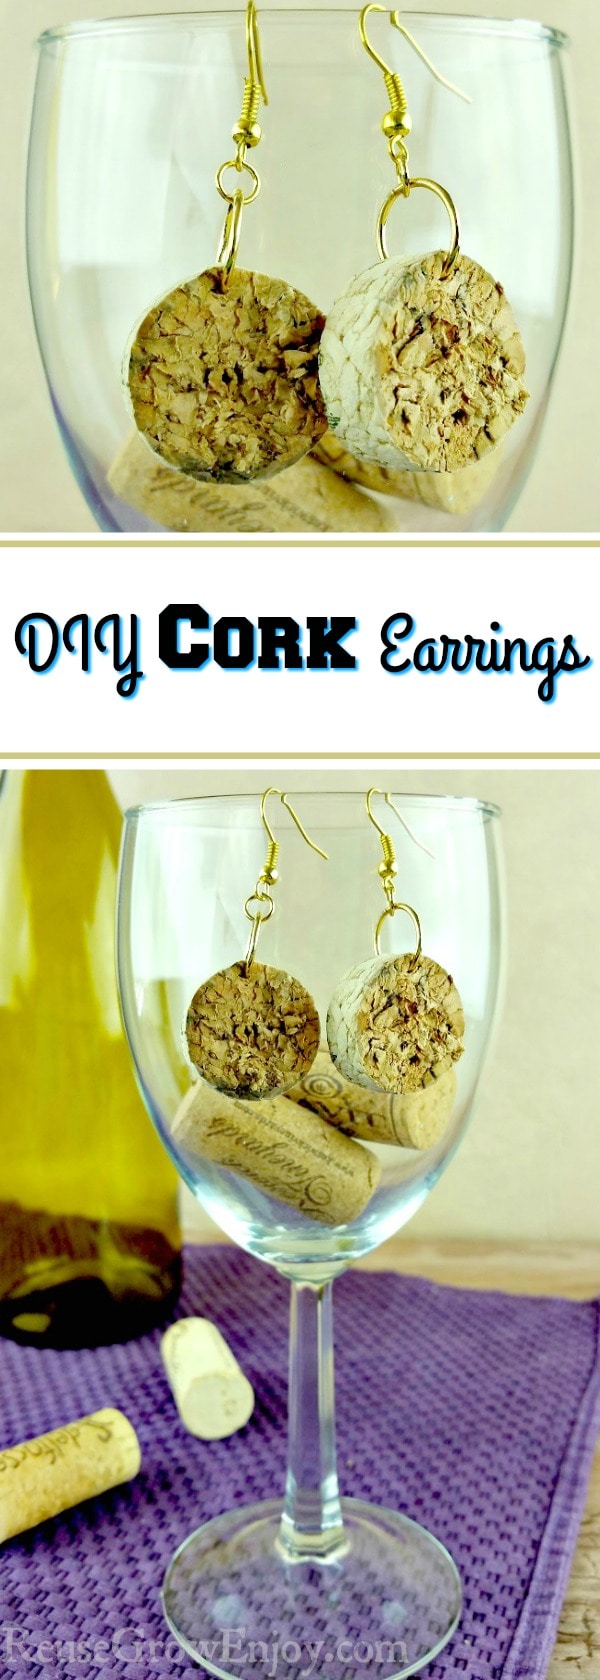 If you have corks kicking around, I have a really cute and easy project for you to try. You can make these DIY cork earrings in just a few minutes!